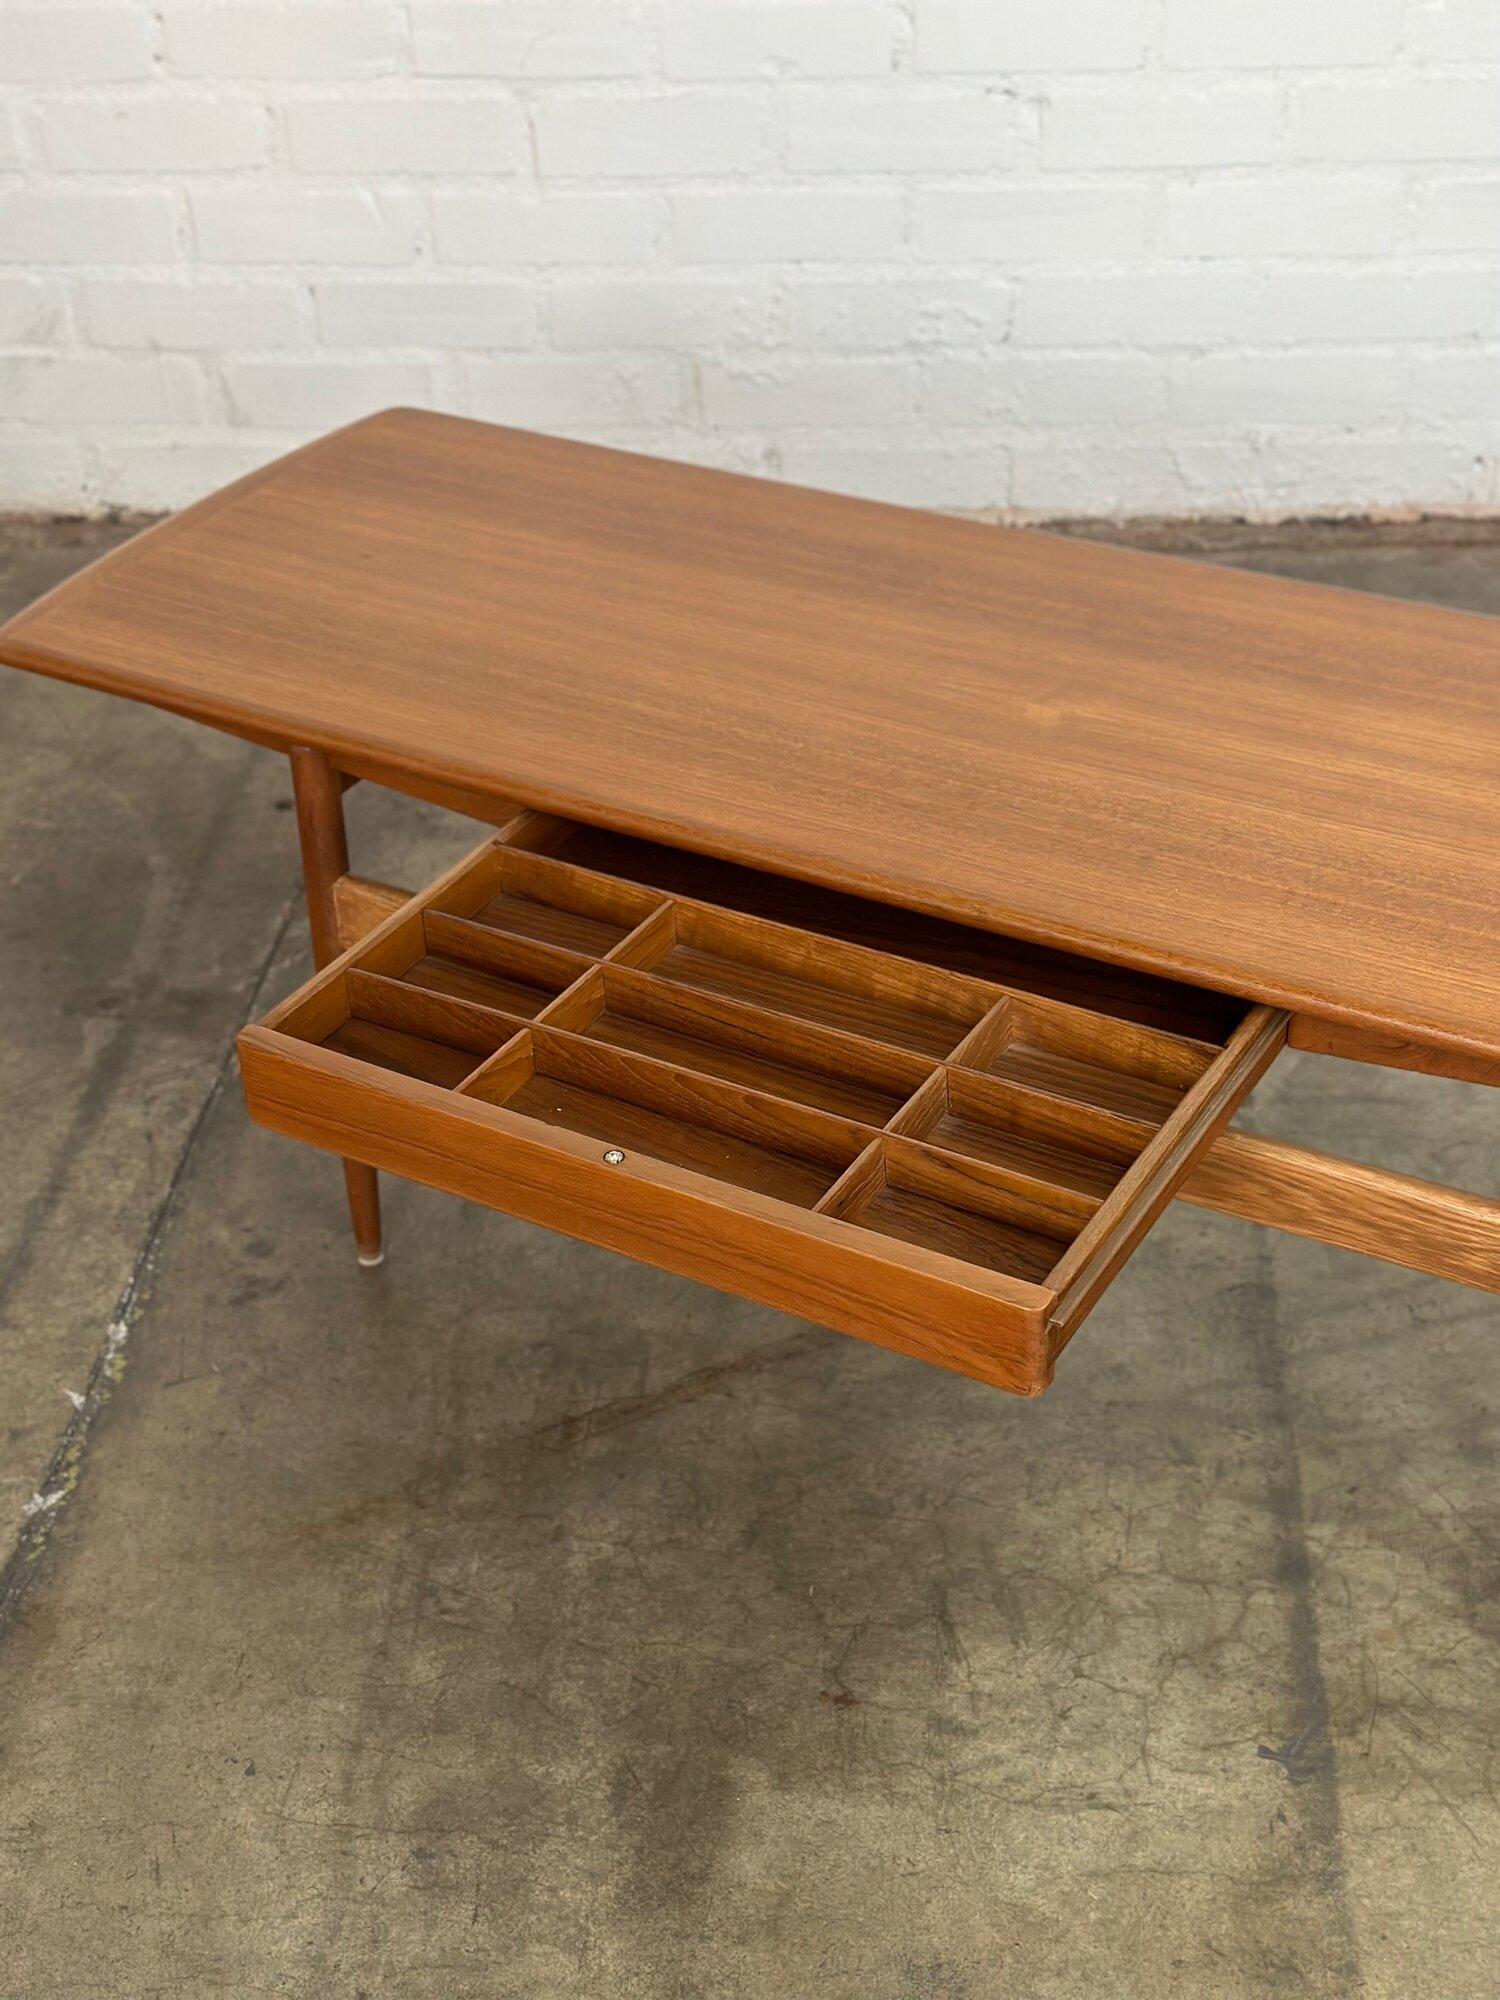 W60 D21 H21

Restored 1960s coffee table in overall great condition. Item was fully refinished and reinforced by our in house Carpentry team. Coffee table over nice teak construction with solid teak end caps one storage drawer with dividers. Minor